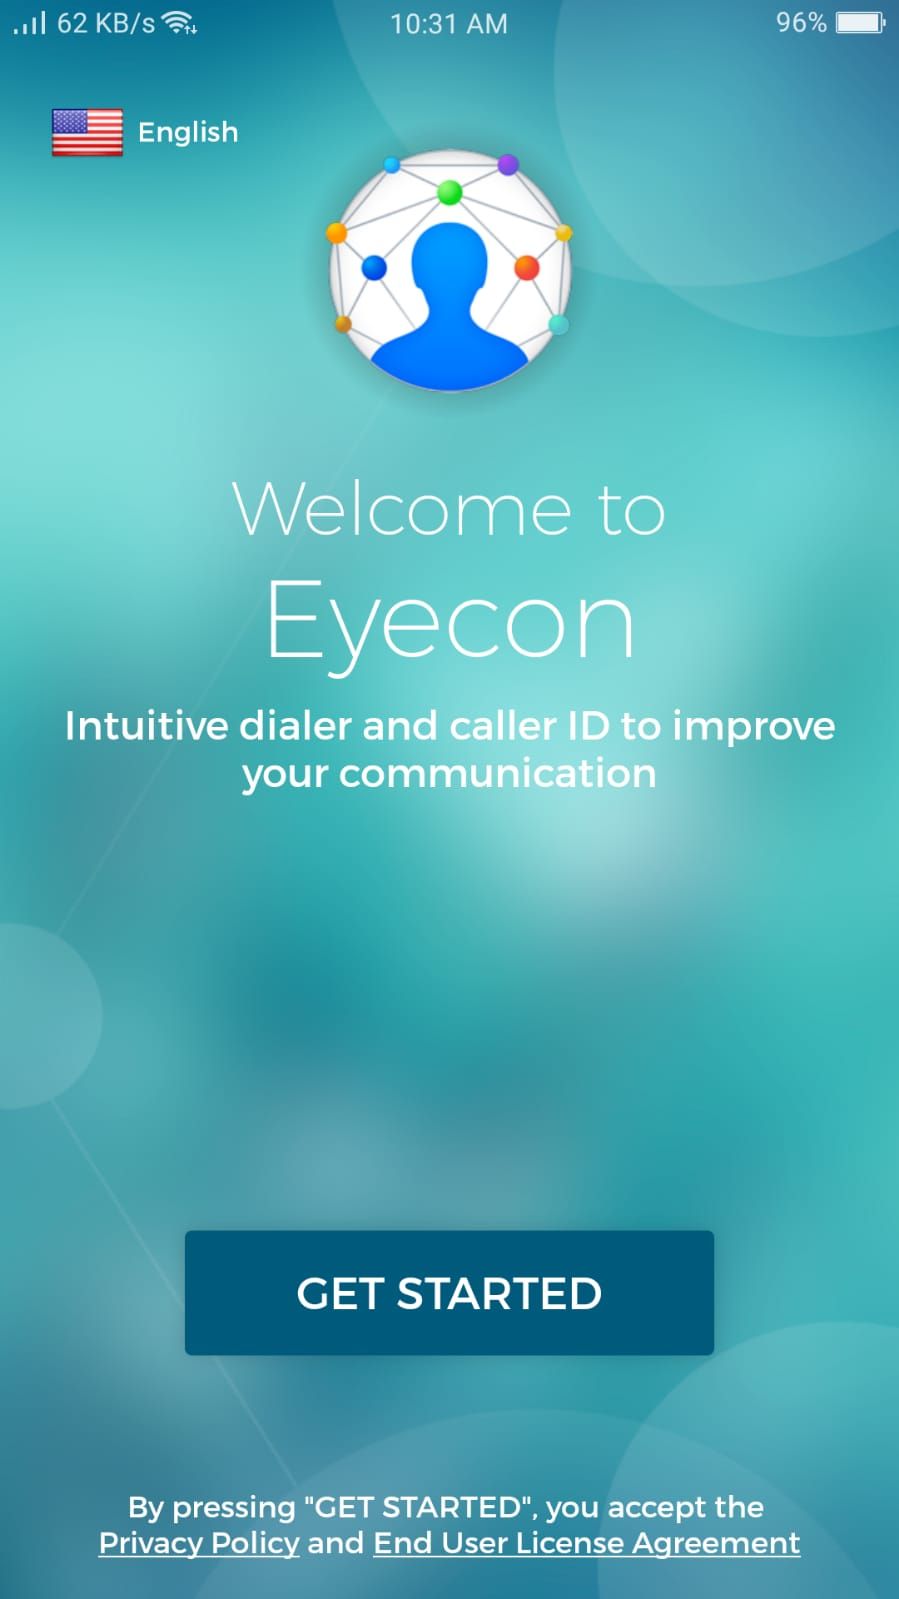 Eyecon - Get Started Page